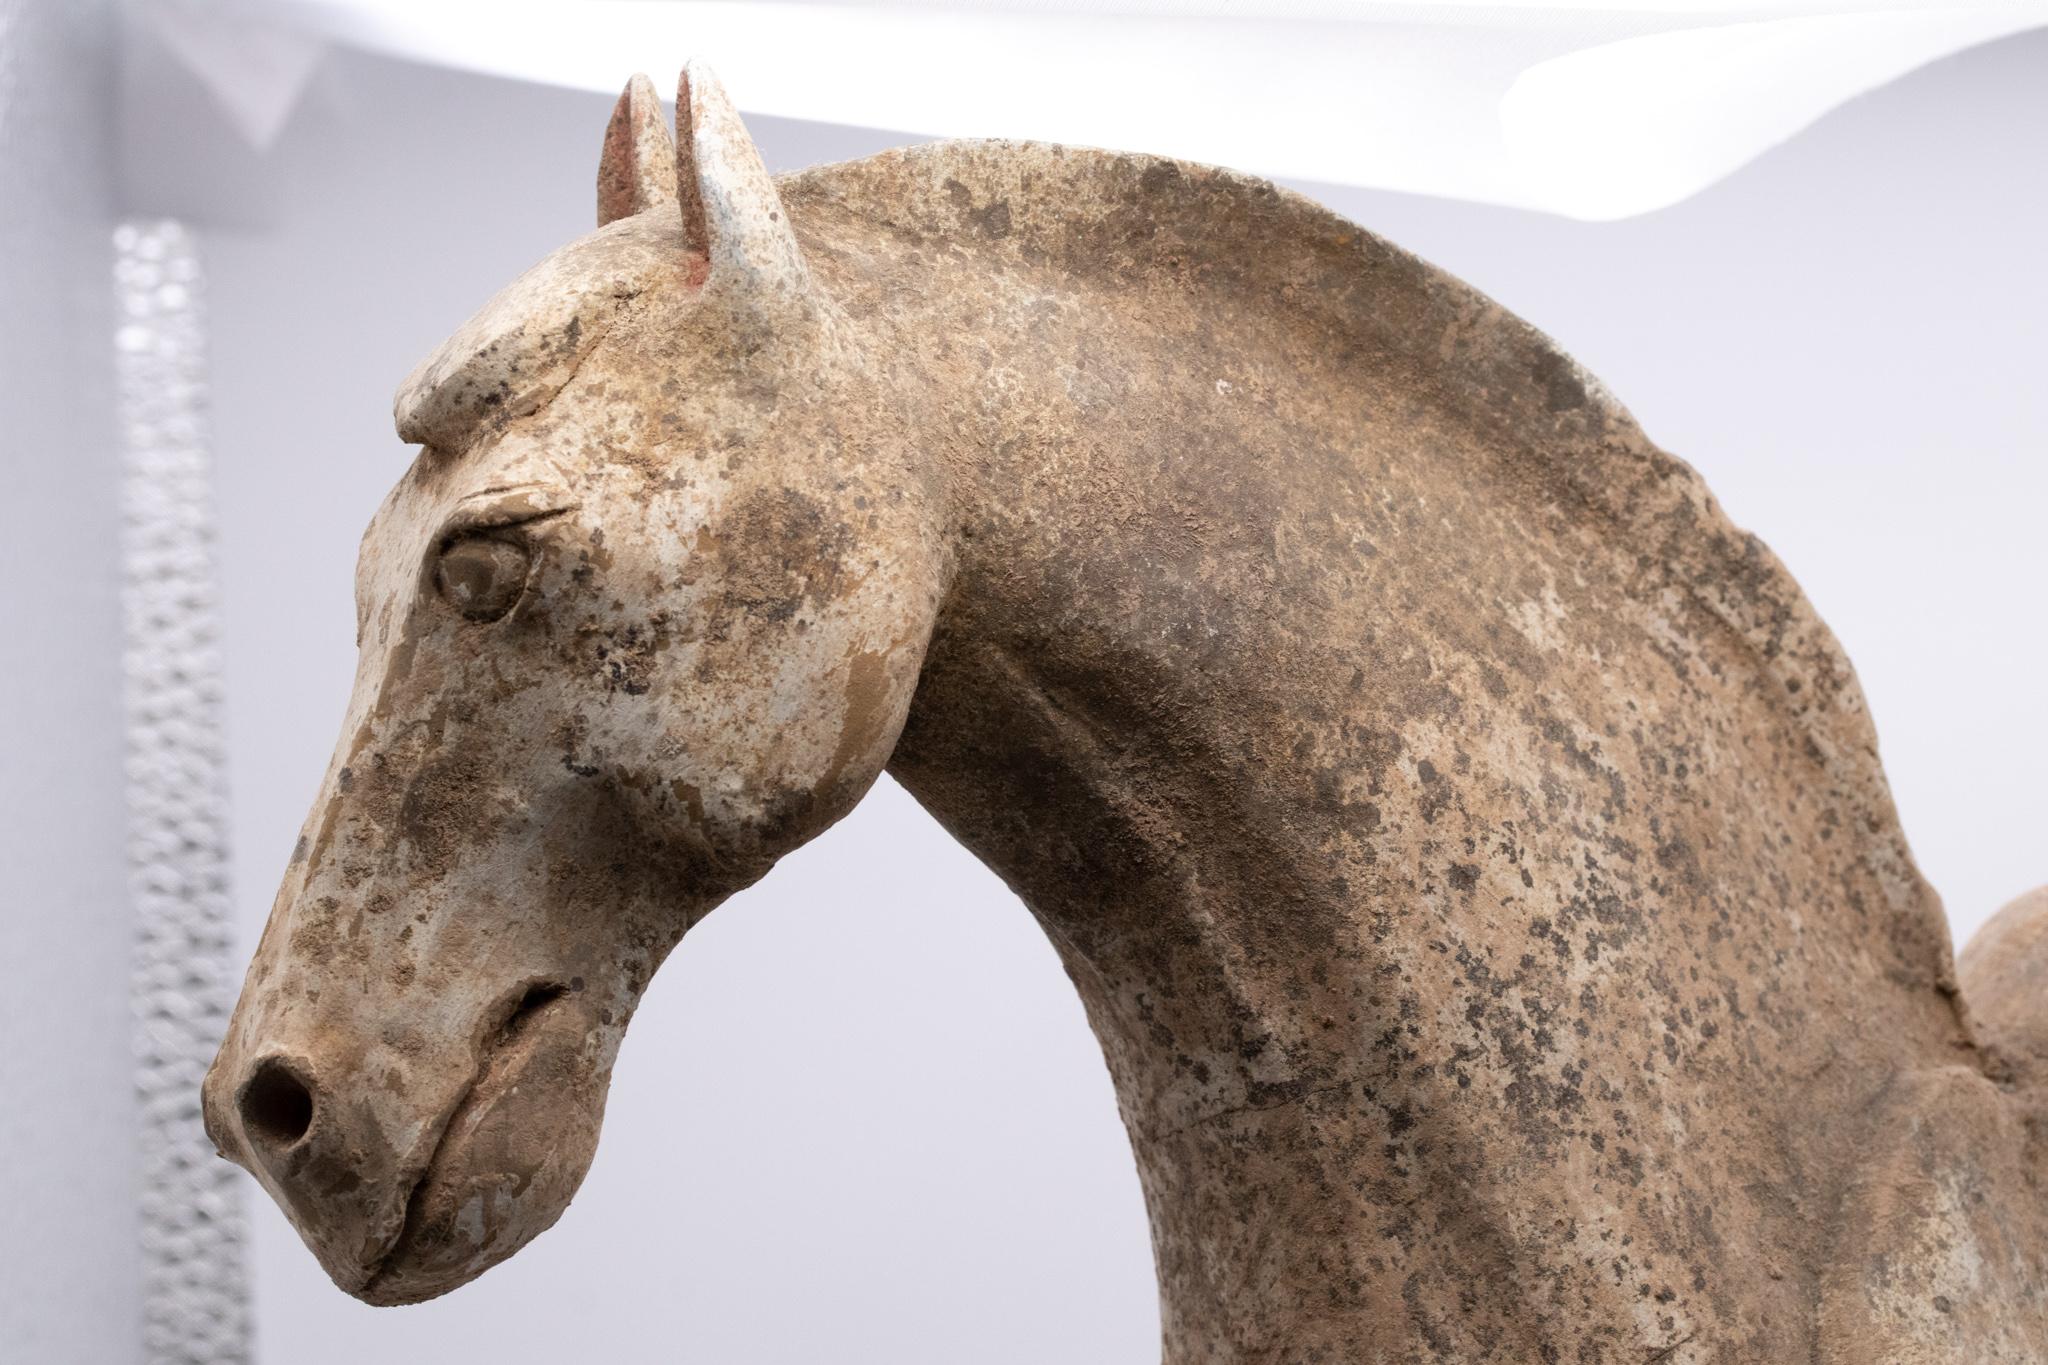 China 618-907 Ad Tang Dynasty Ancient Earthenware Sculpture of a Walking Horse For Sale 2